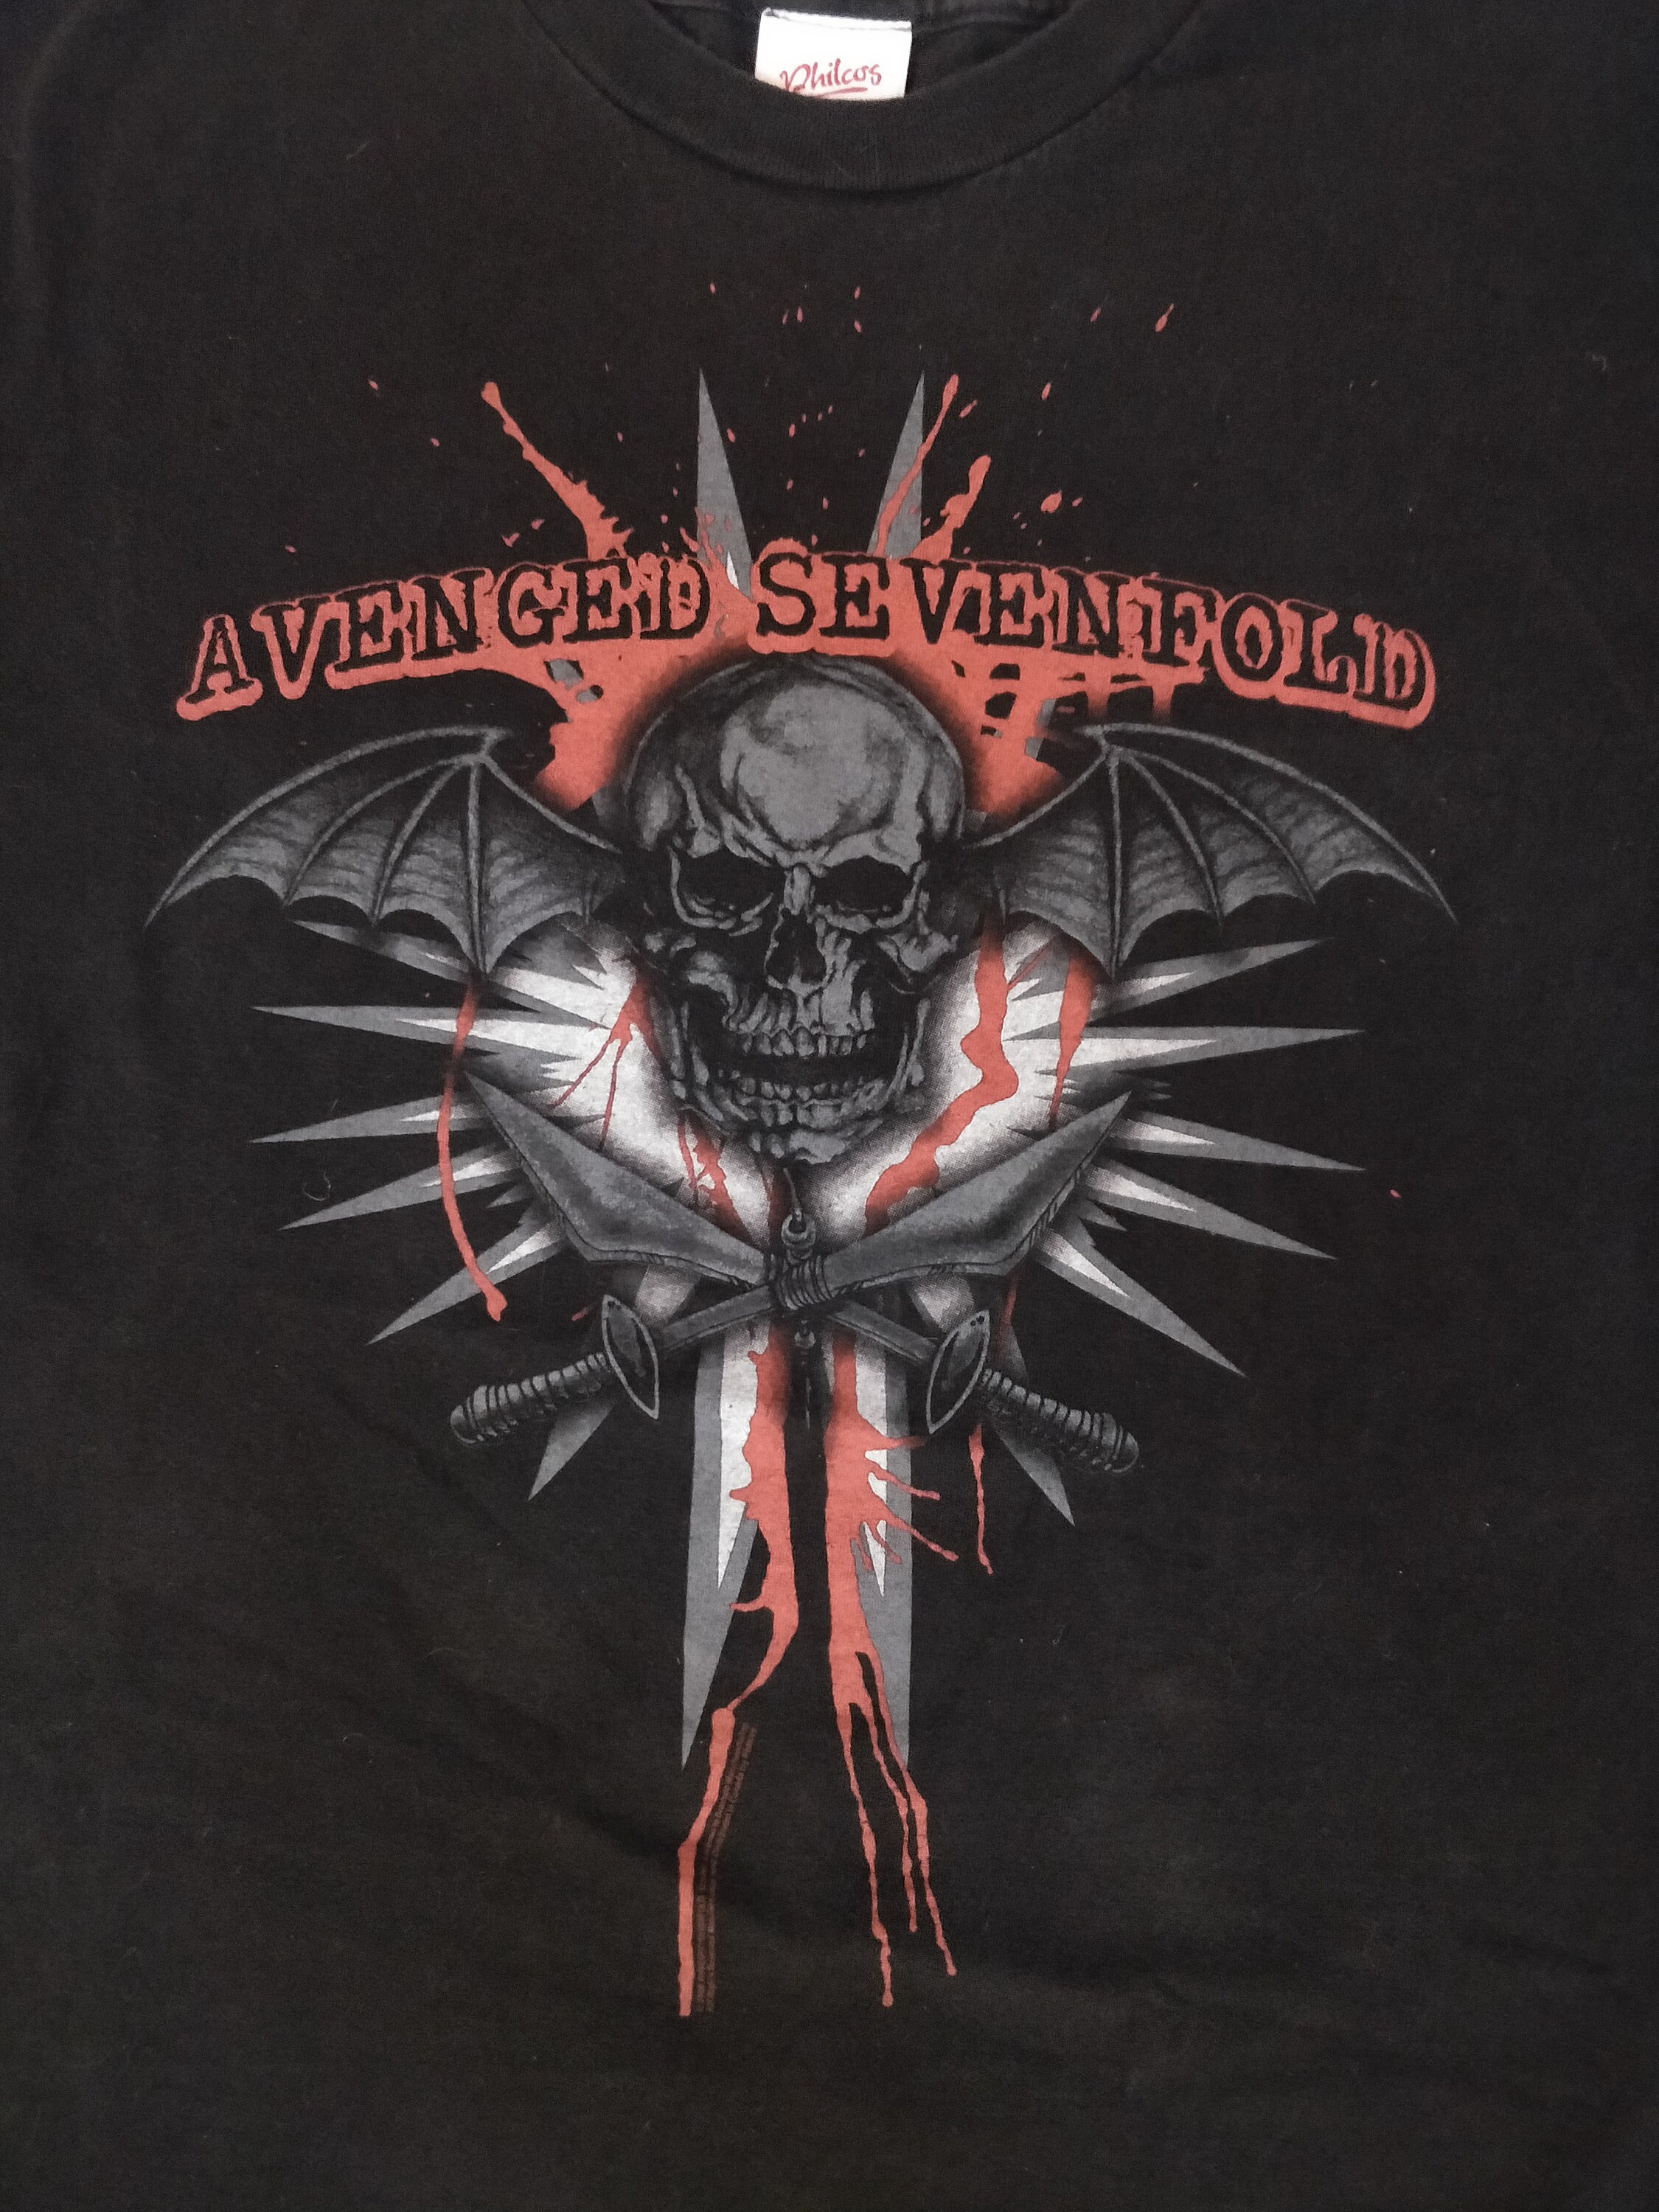 Discover Oldschool Avenged Sevenfold shirt size xl